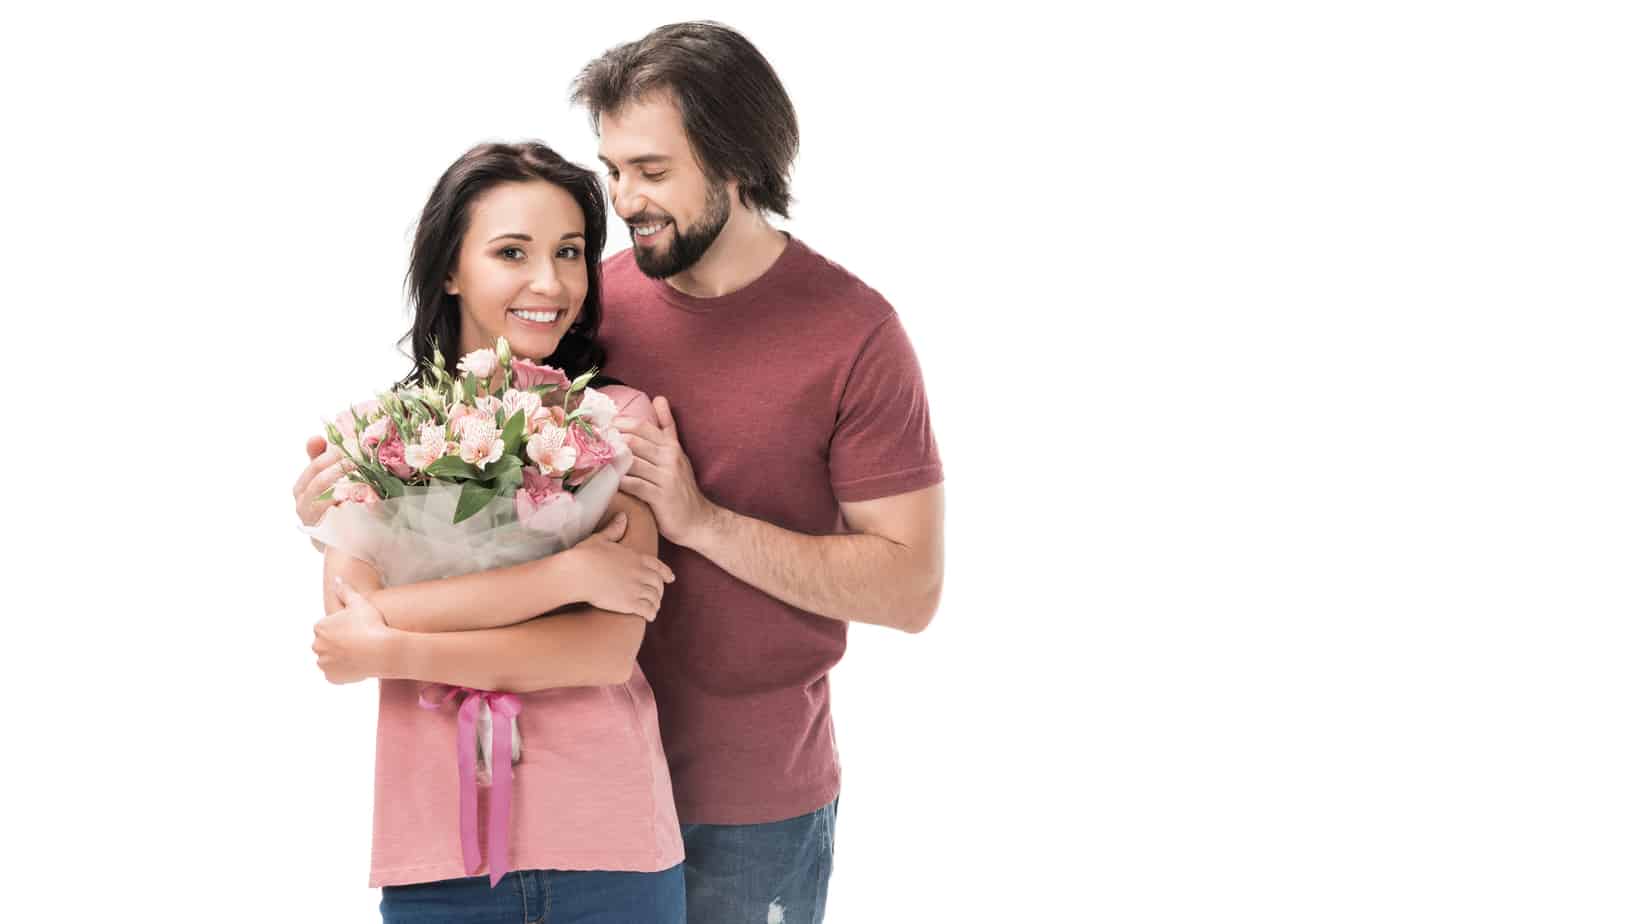 A man holding a bouquet of flowers next to a woman